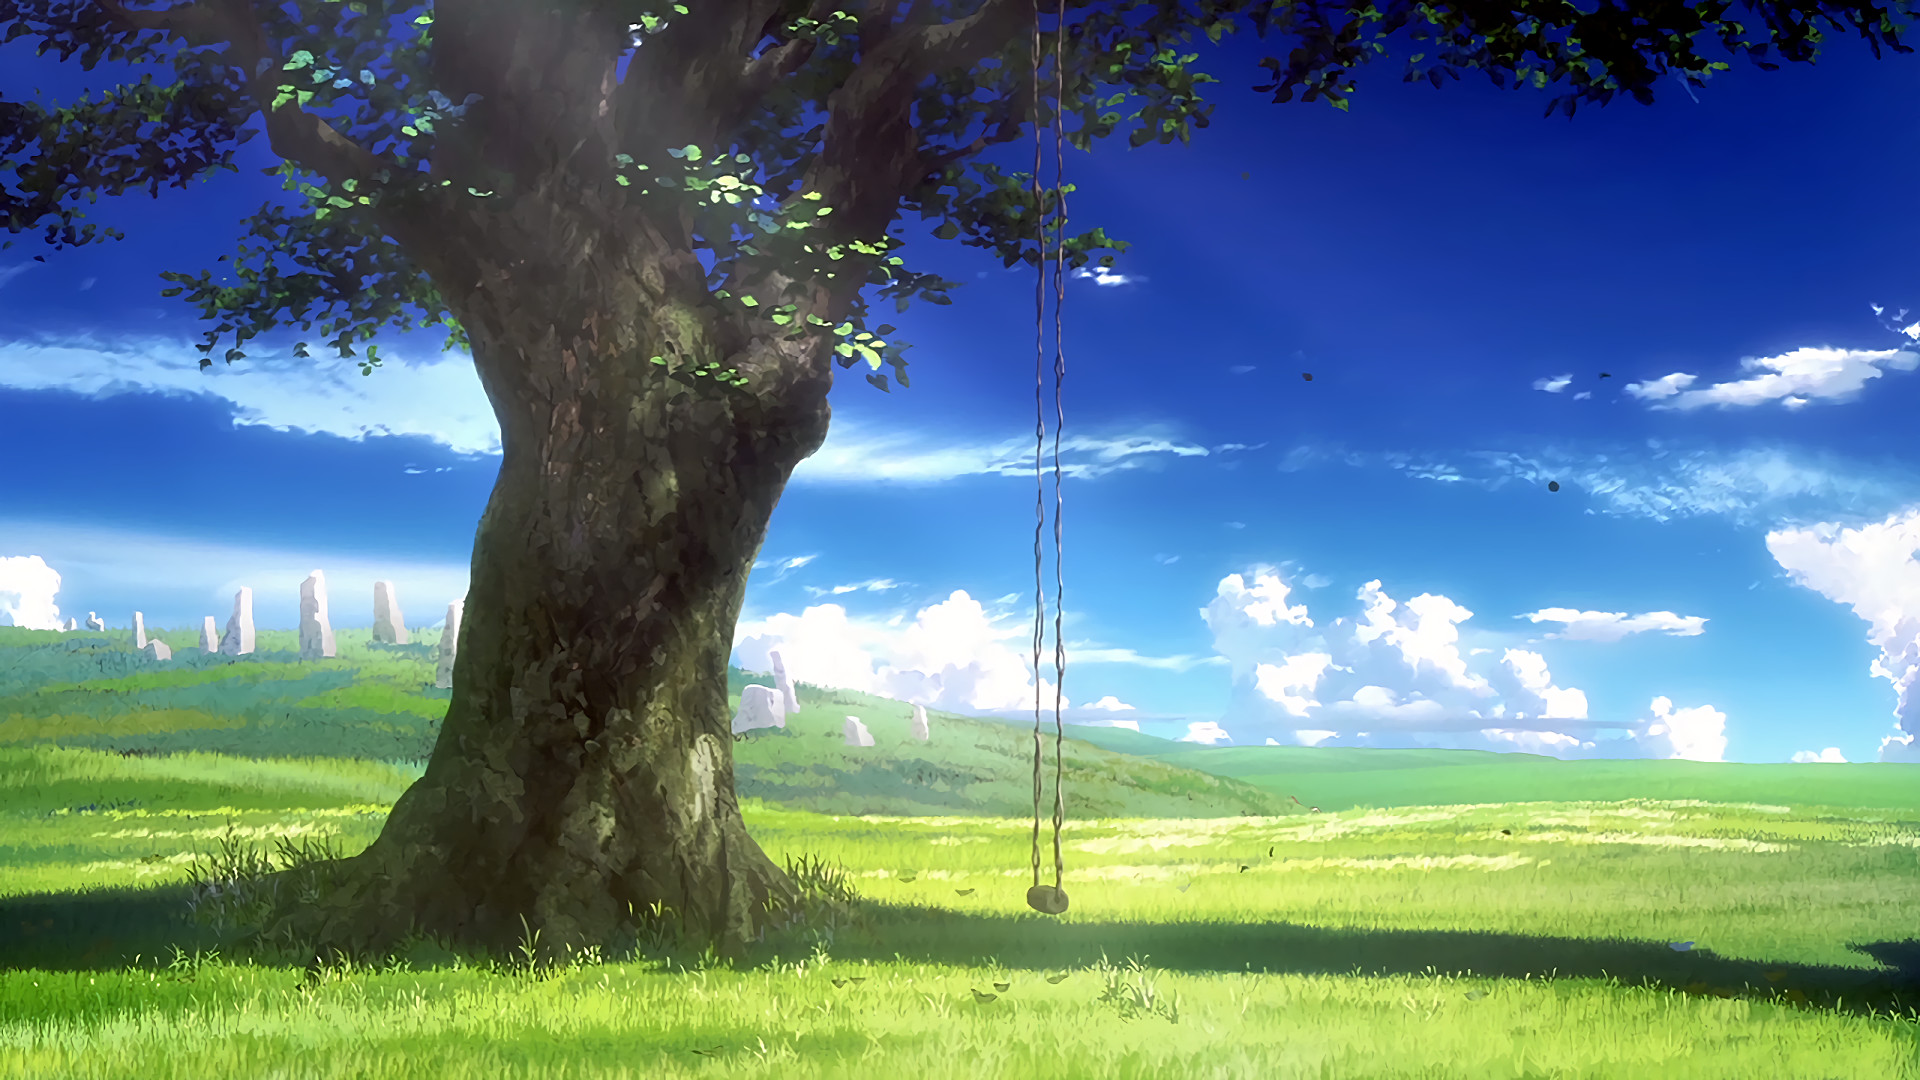 Anime Nature Wallpaper 77 Images